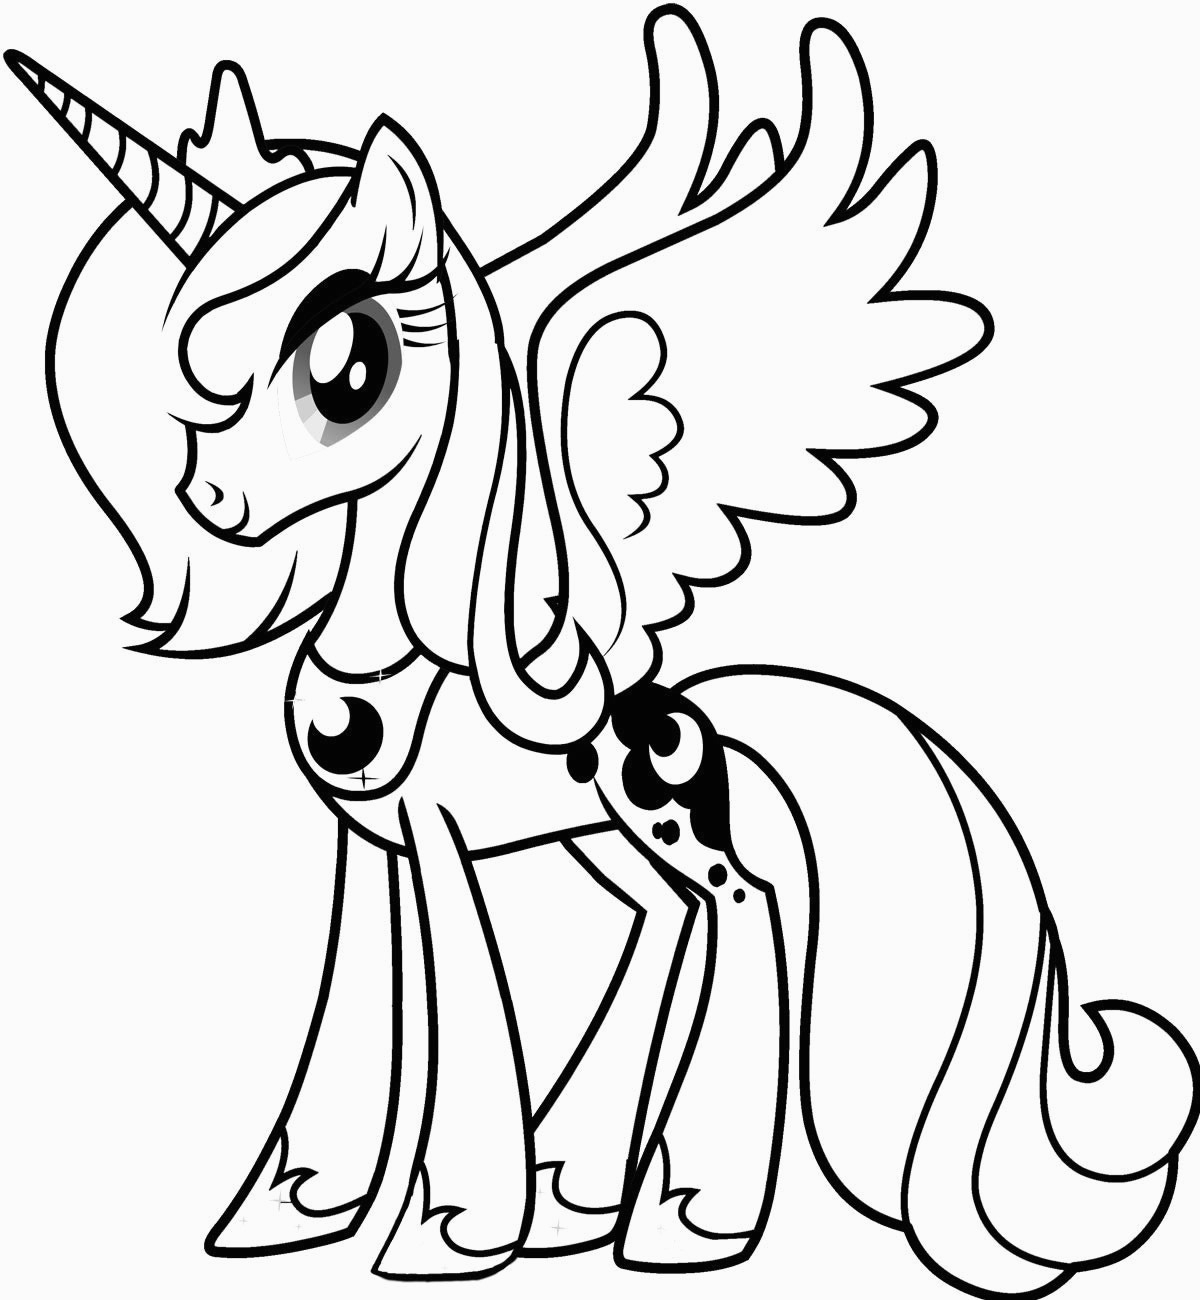 Free Printable My Little Pony Coloring Pages For Kids For My Little - Free Printable My Little Pony Coloring Pages